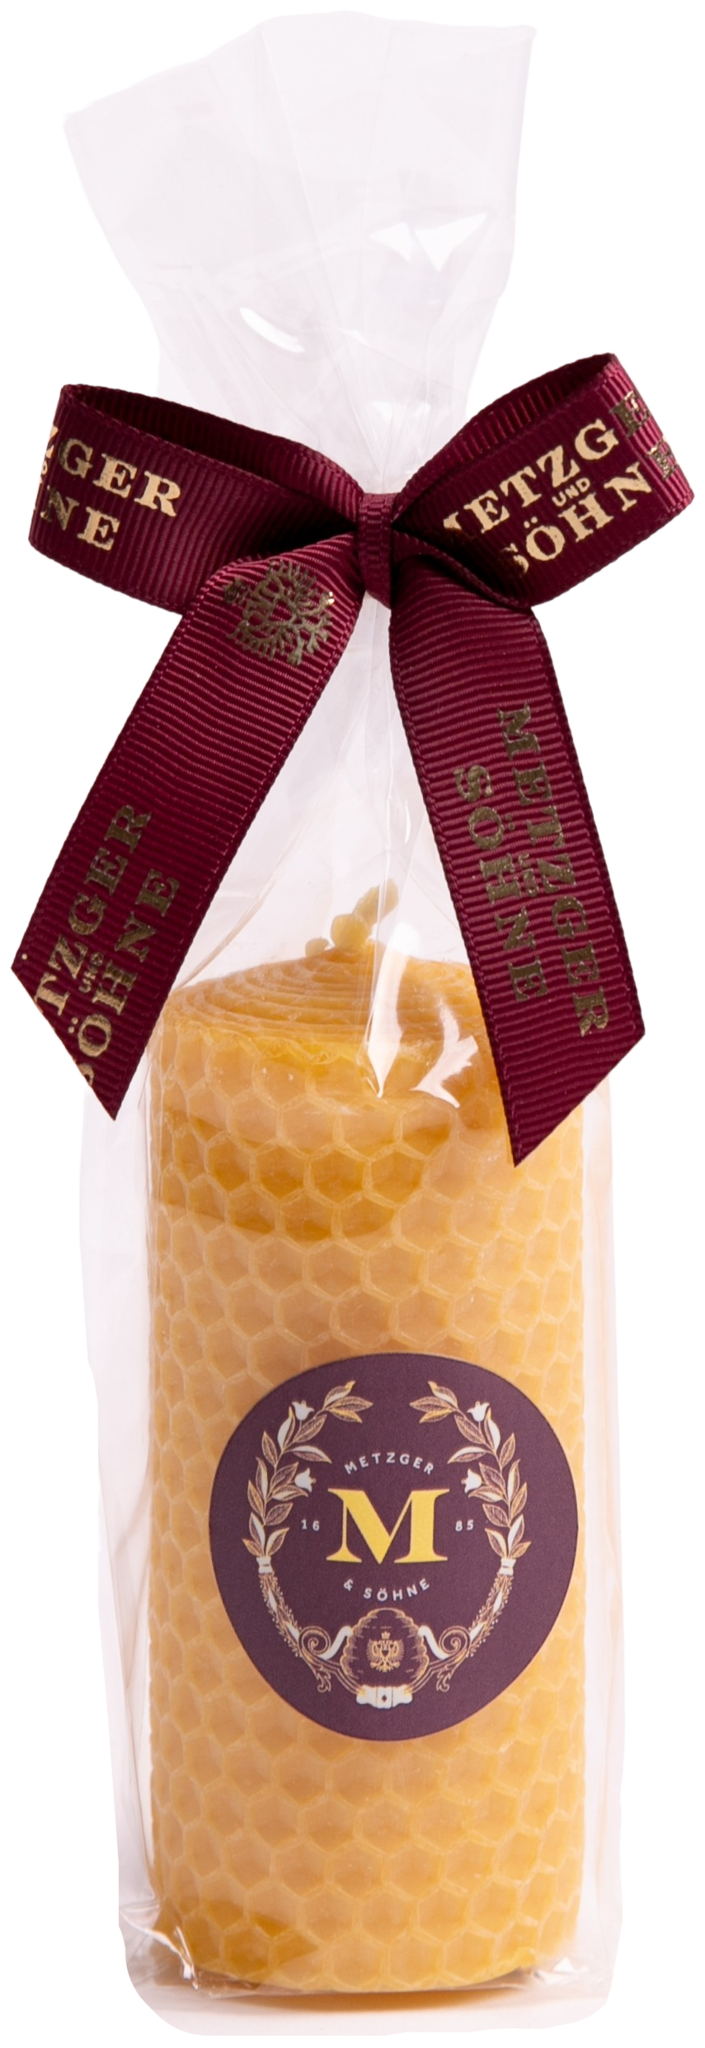 100% beeswax candle rolled 40x100mm. Beeswax is a pure natural product, produced by honey bees. Beeswax is fragrant and burns harmlessly.